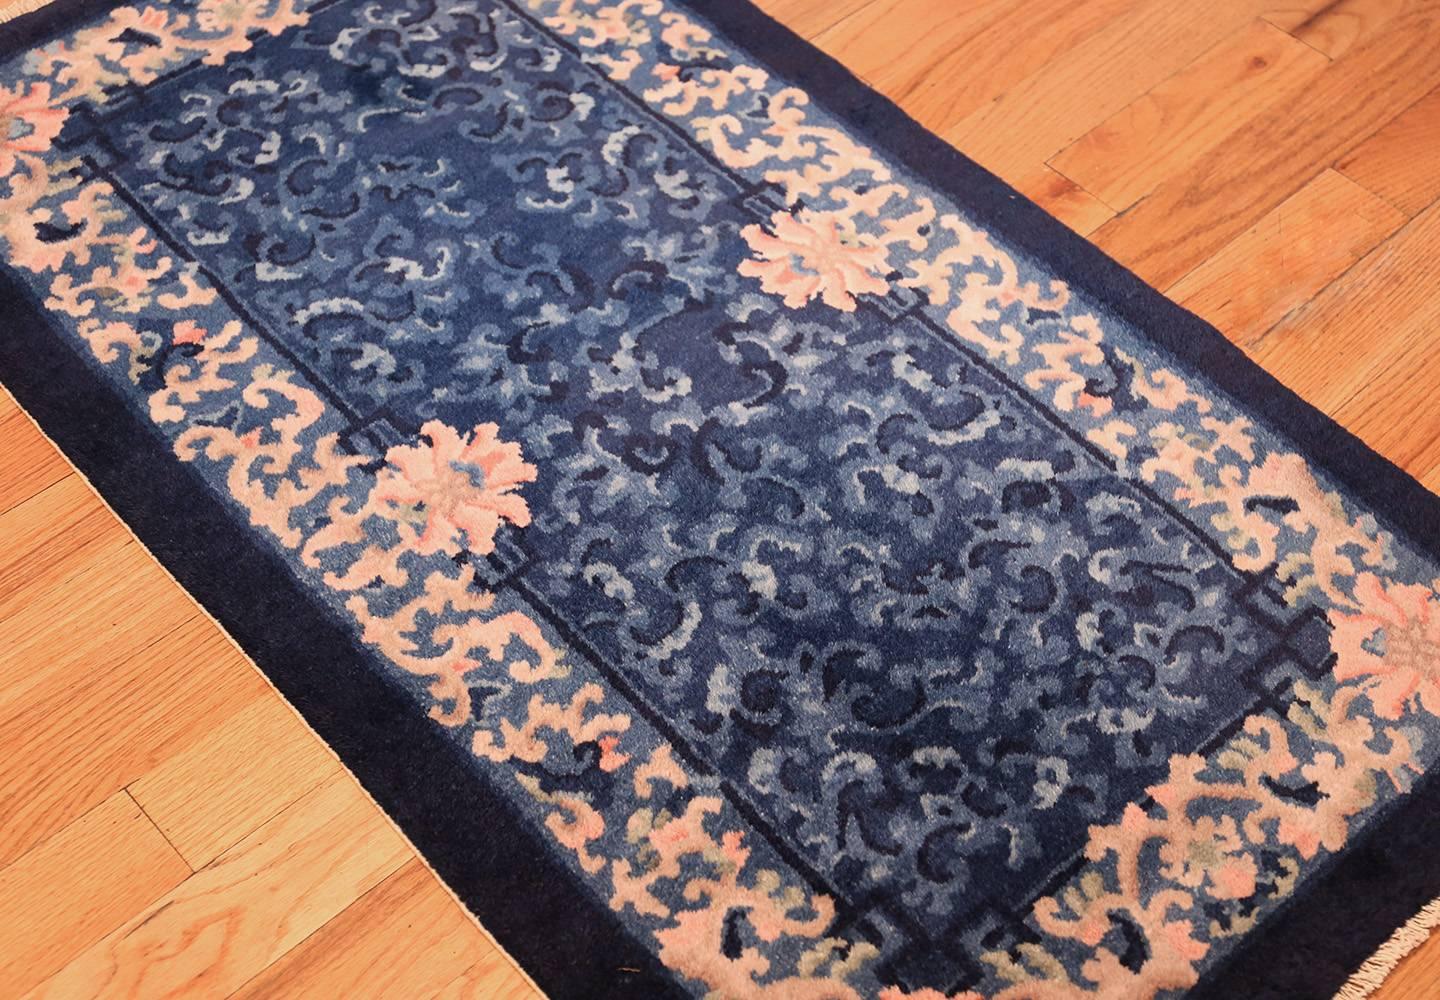 Chinese Export Pair of Blue Antique Chinese Rugs. Size: 2 ft 5 in x 4 ft 4 in (0.74 m x 1.32 m)